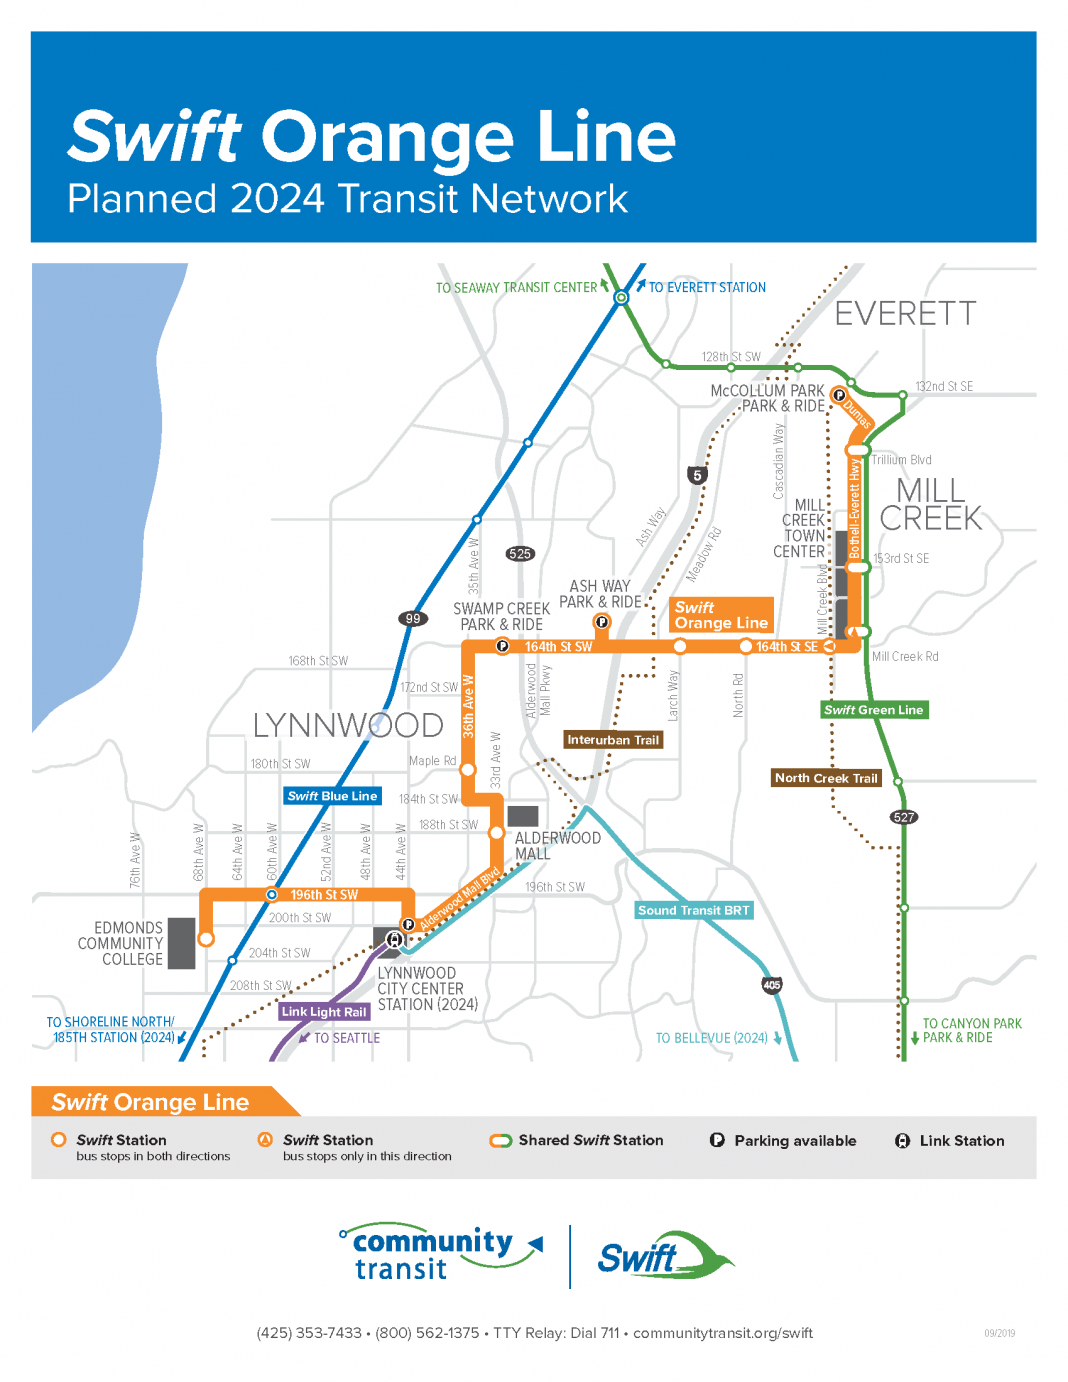 Swift Orange Line map of the planned 2024 transit service